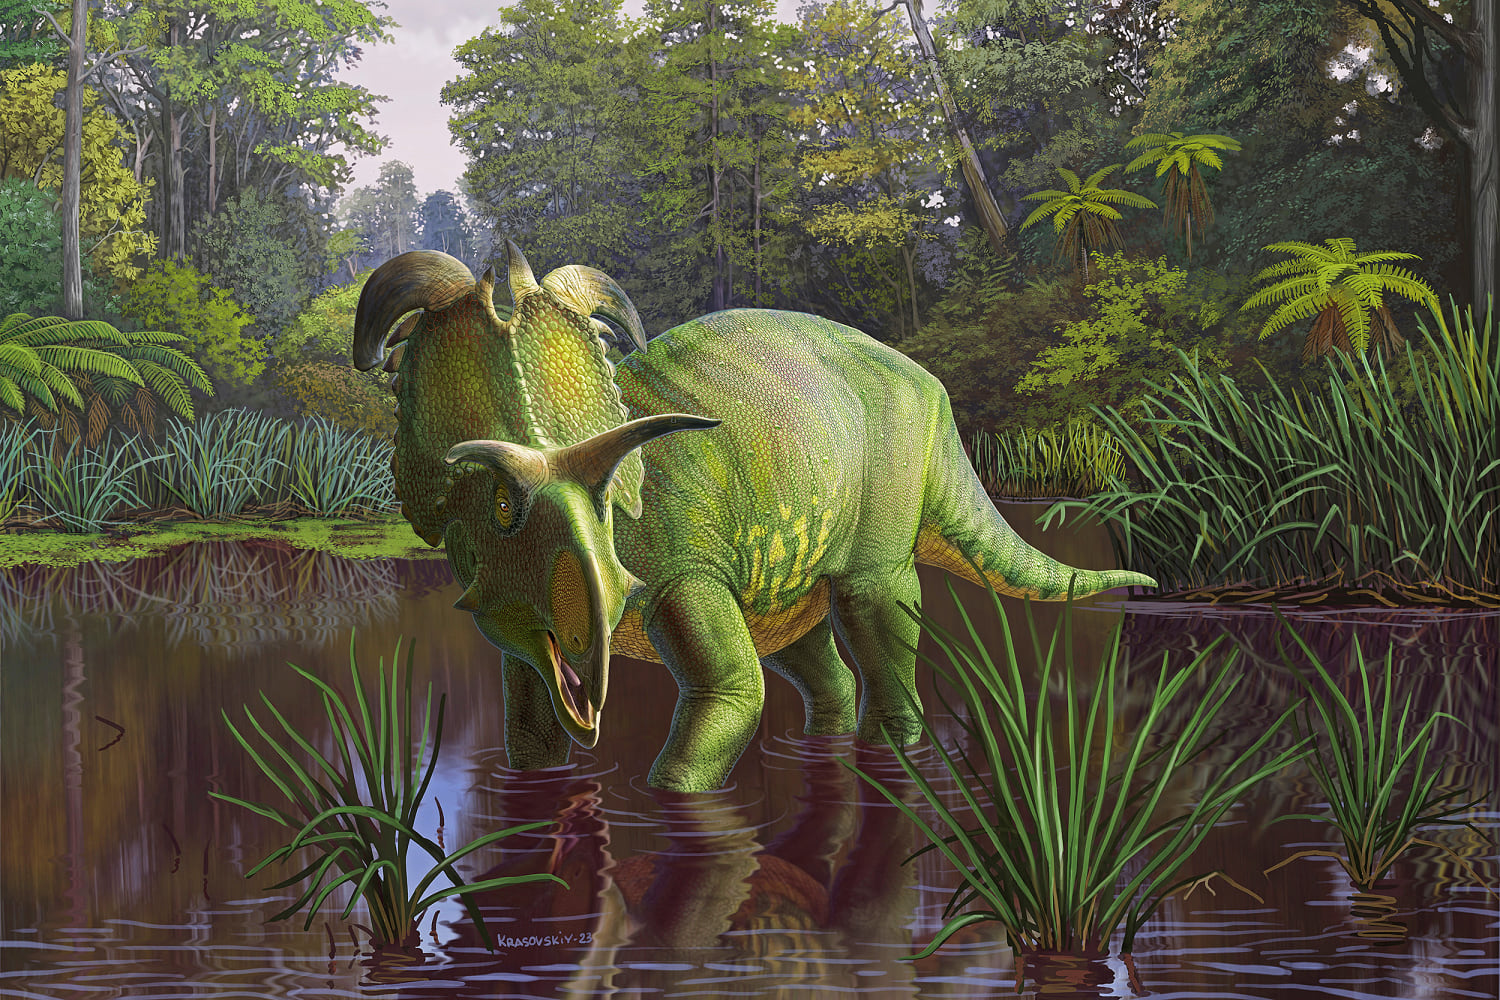 A giant dinosaur with blade-like horns roamed Montana. It's been named after Norse god Loki.